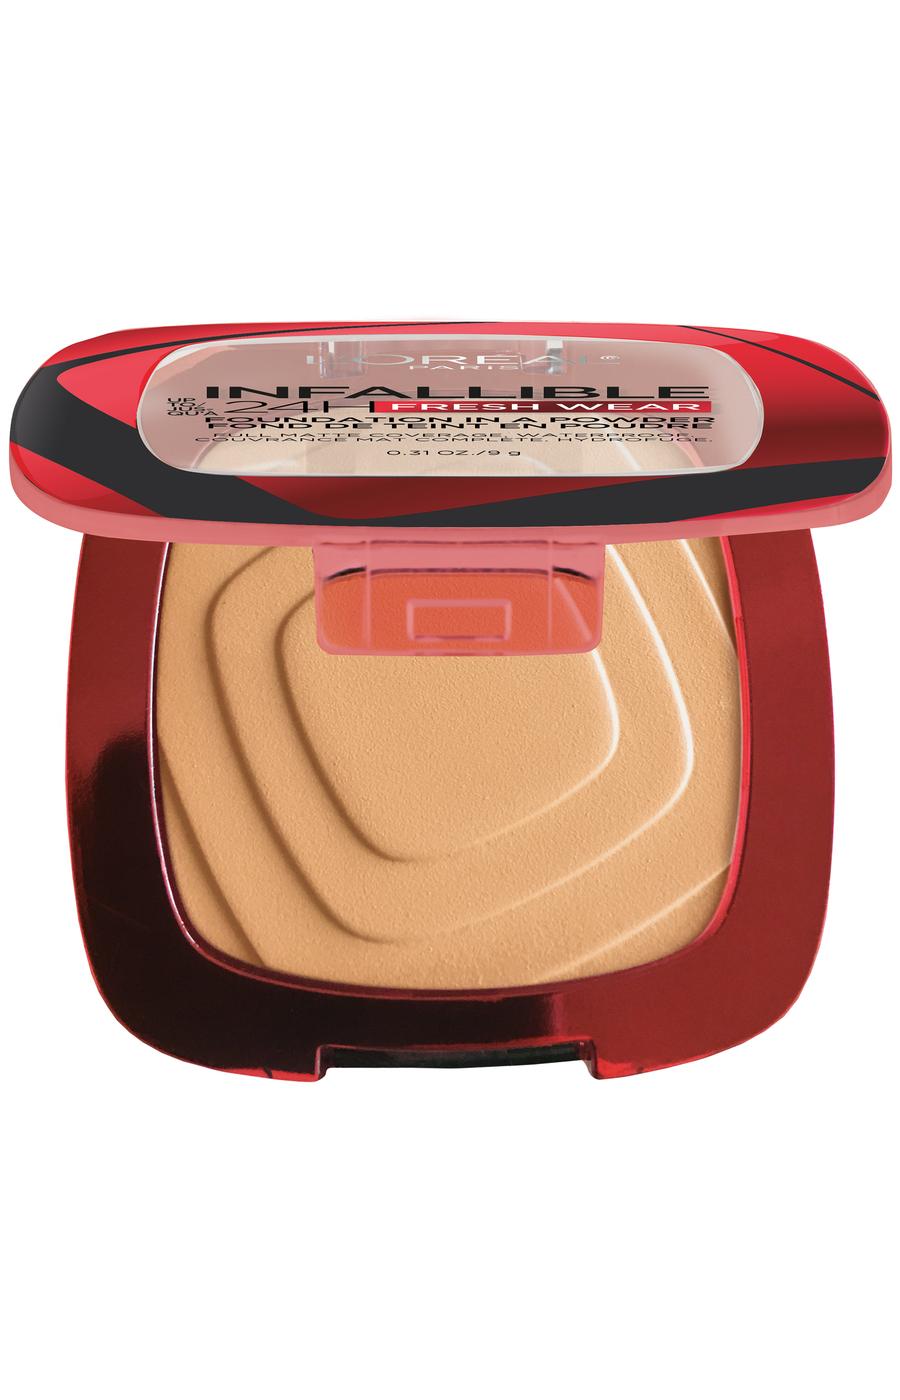 L'Oréal Paris Infallible Up to 24H Fresh Wear Foundation in a Powder Radiant Sand; image 2 of 4